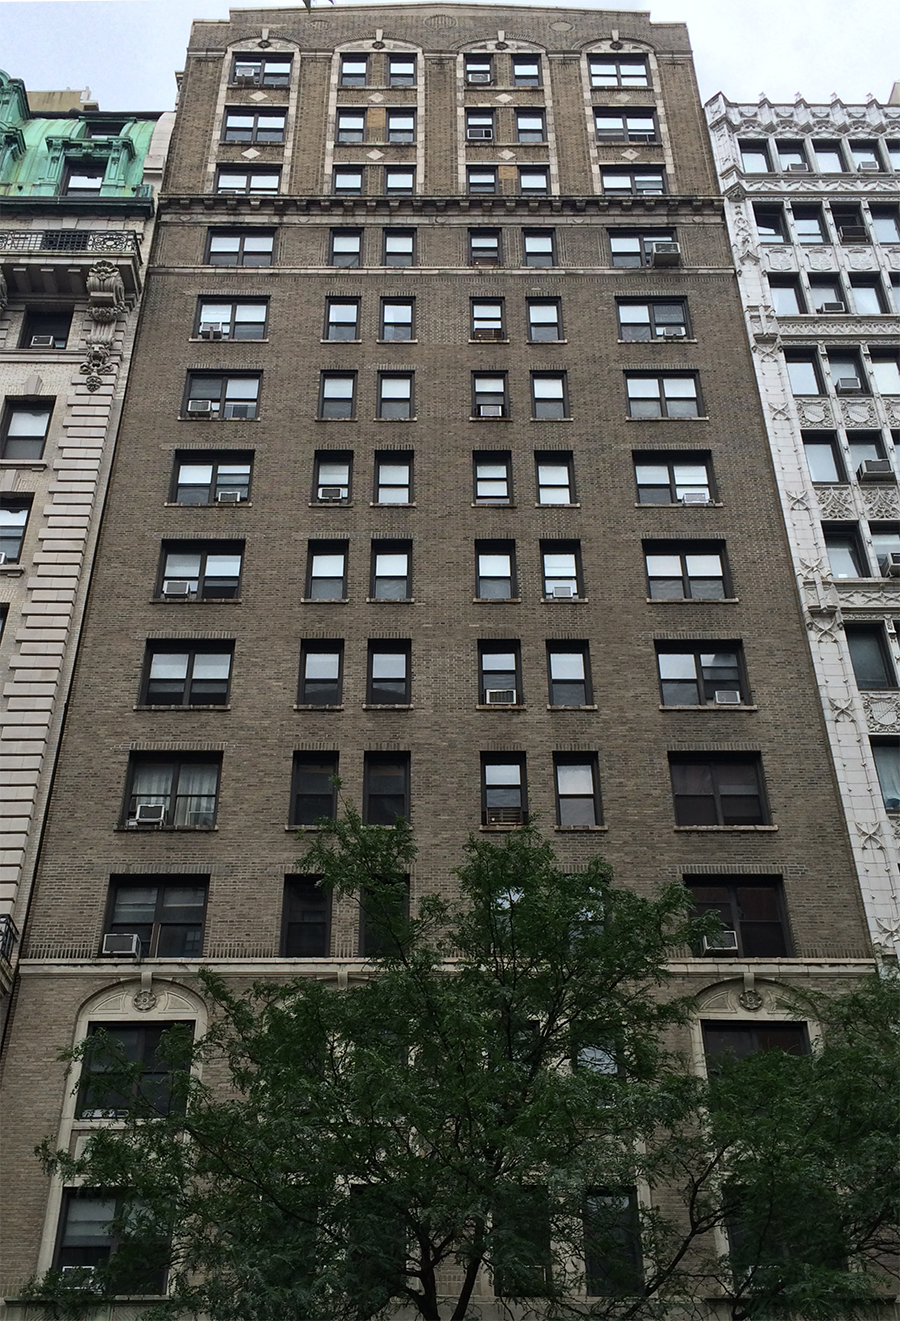 114-116 West 72nd Street (The Sussex)